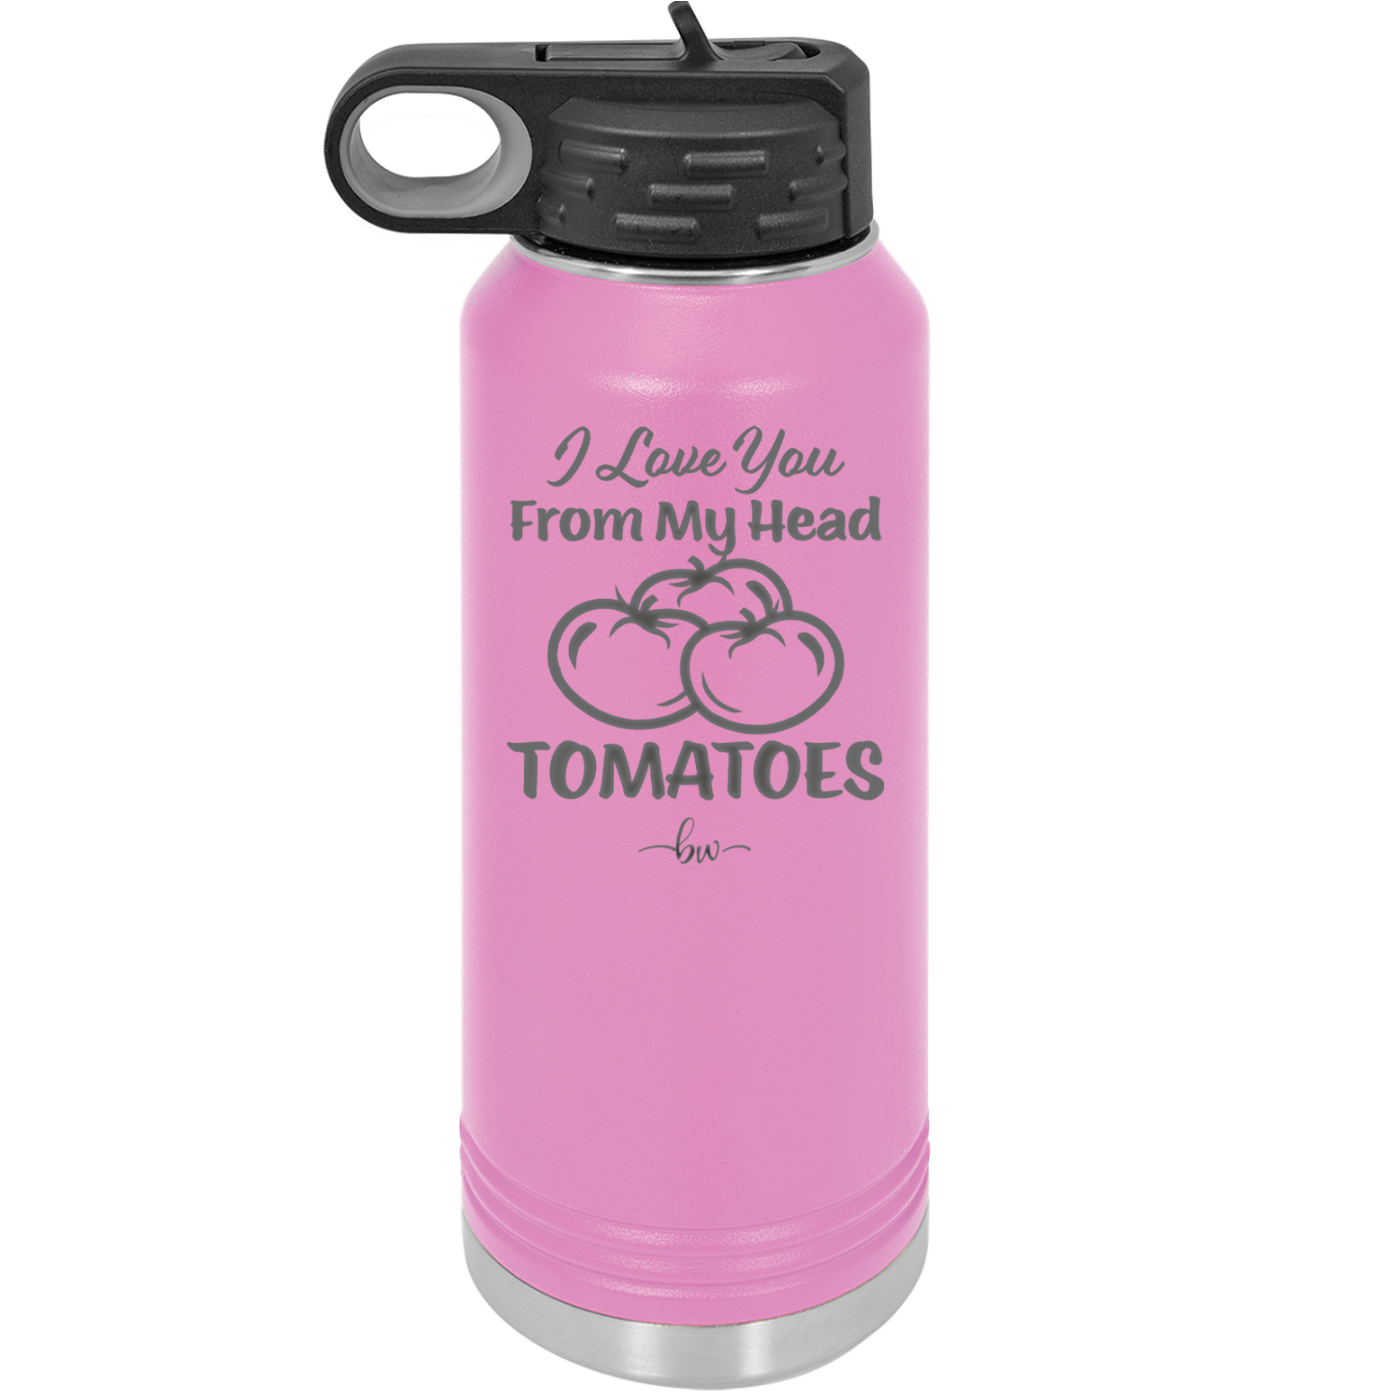 I Love You From My Head Tomatoes - Laser Engraved Stainless Steel Drinkware - 2073 -